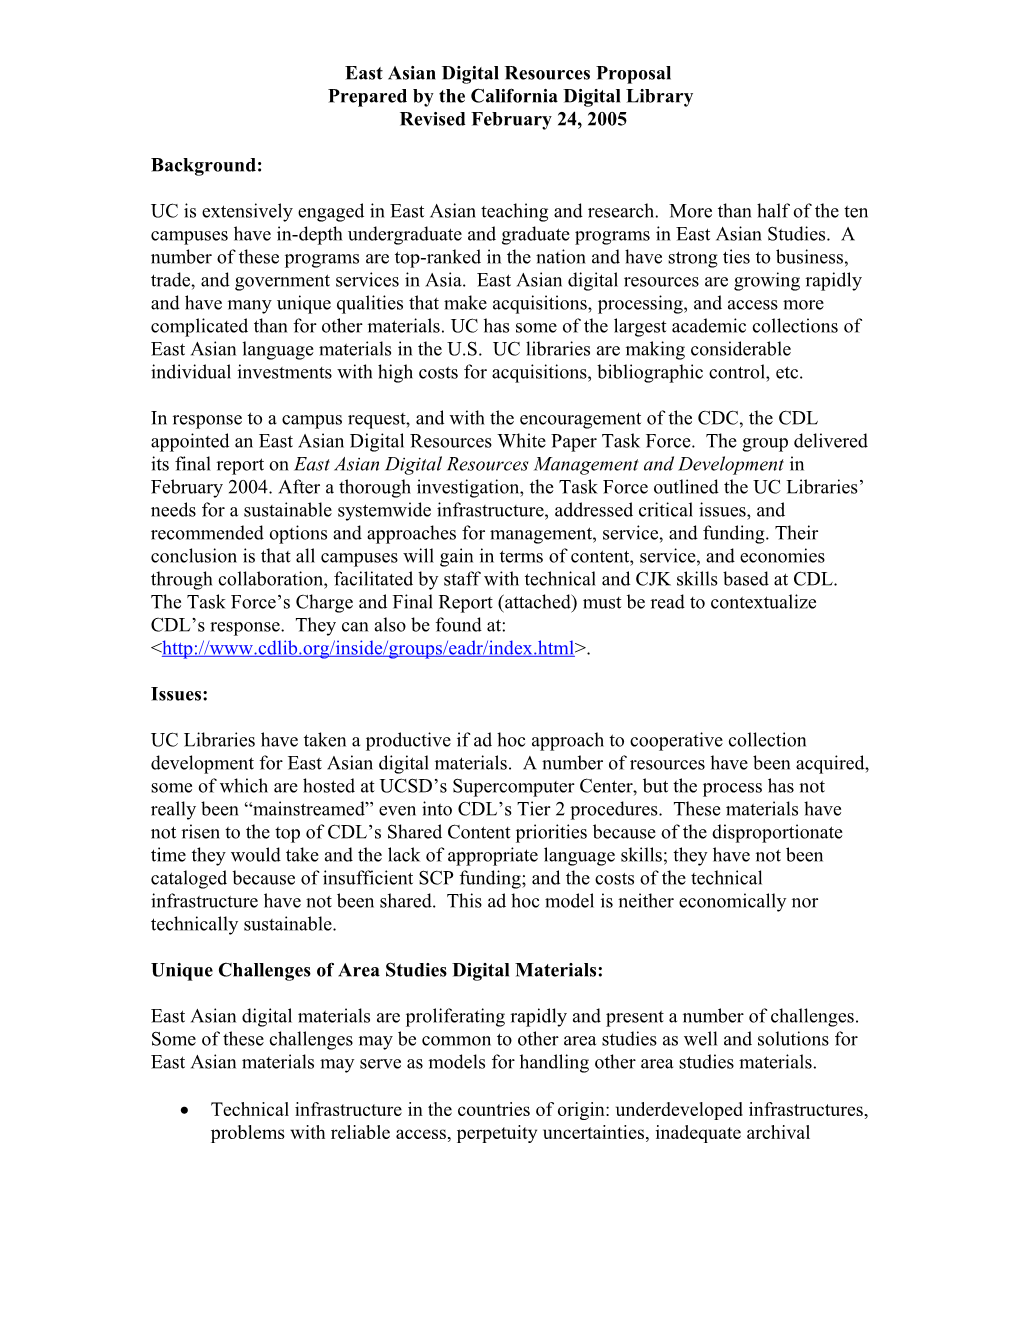 East Asian Digital Resources Proposal for University Librarians